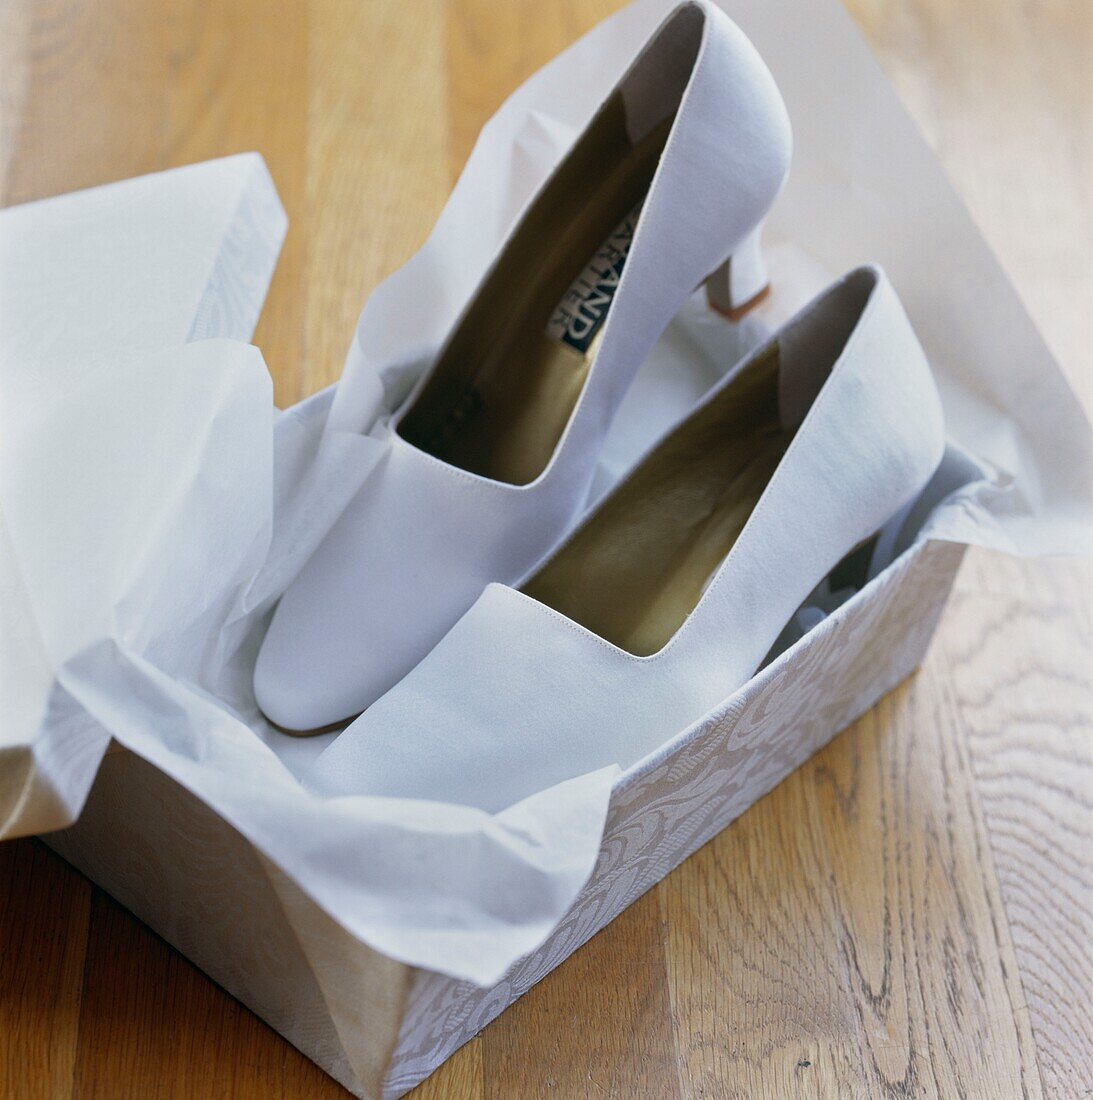 Pair of shoes with wrapping paper in shoebox